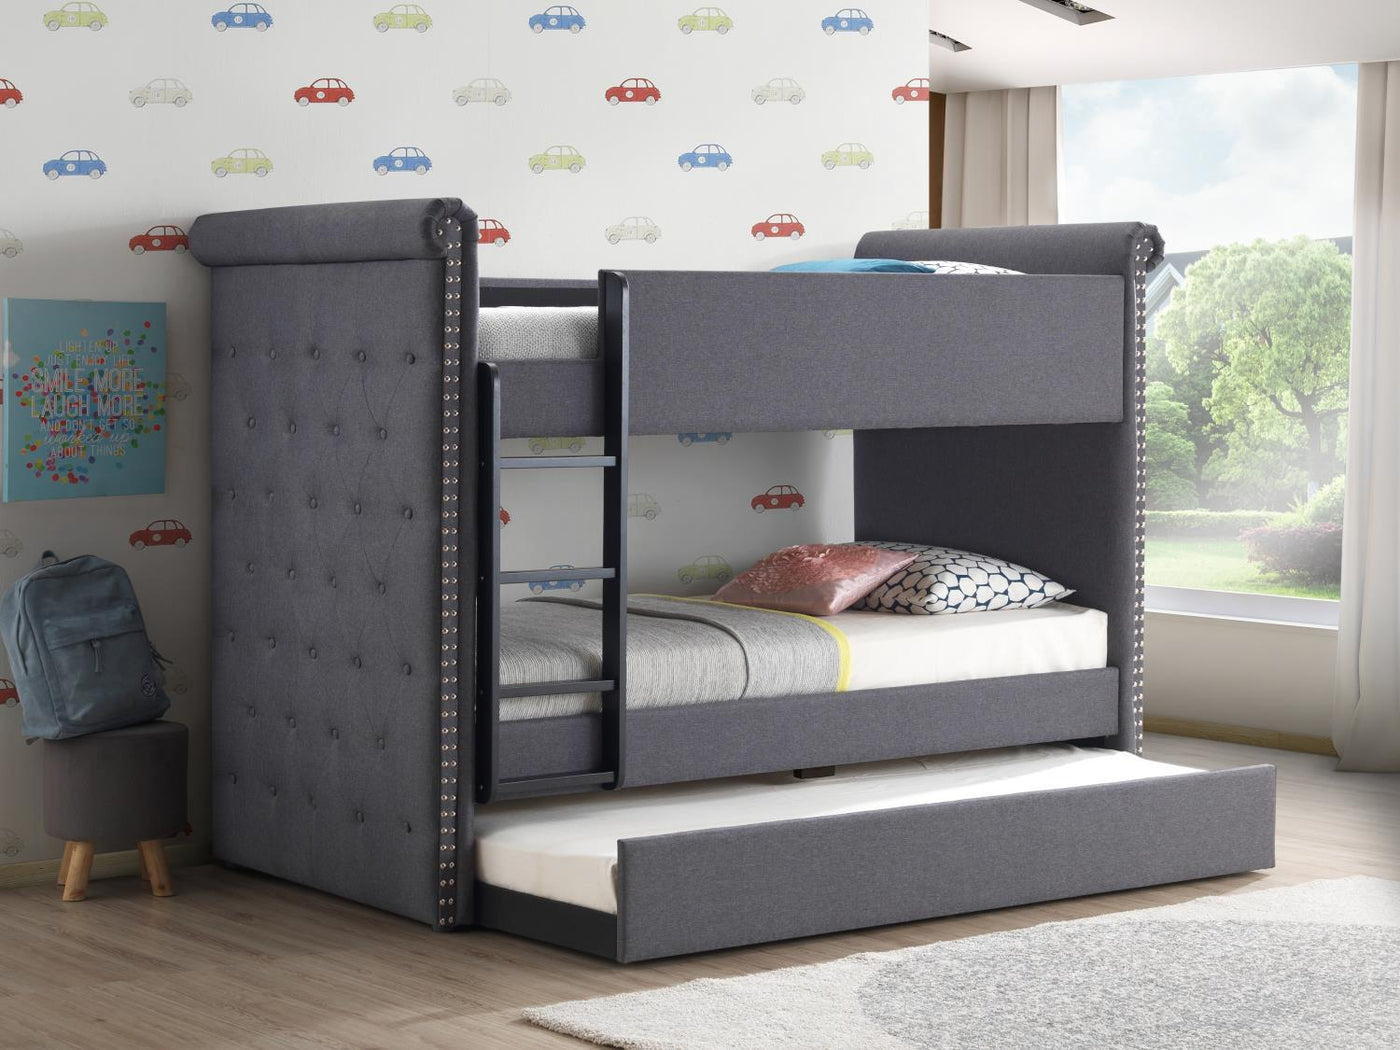 Jamboree Twin Bunk Bed with Trundle – Grey